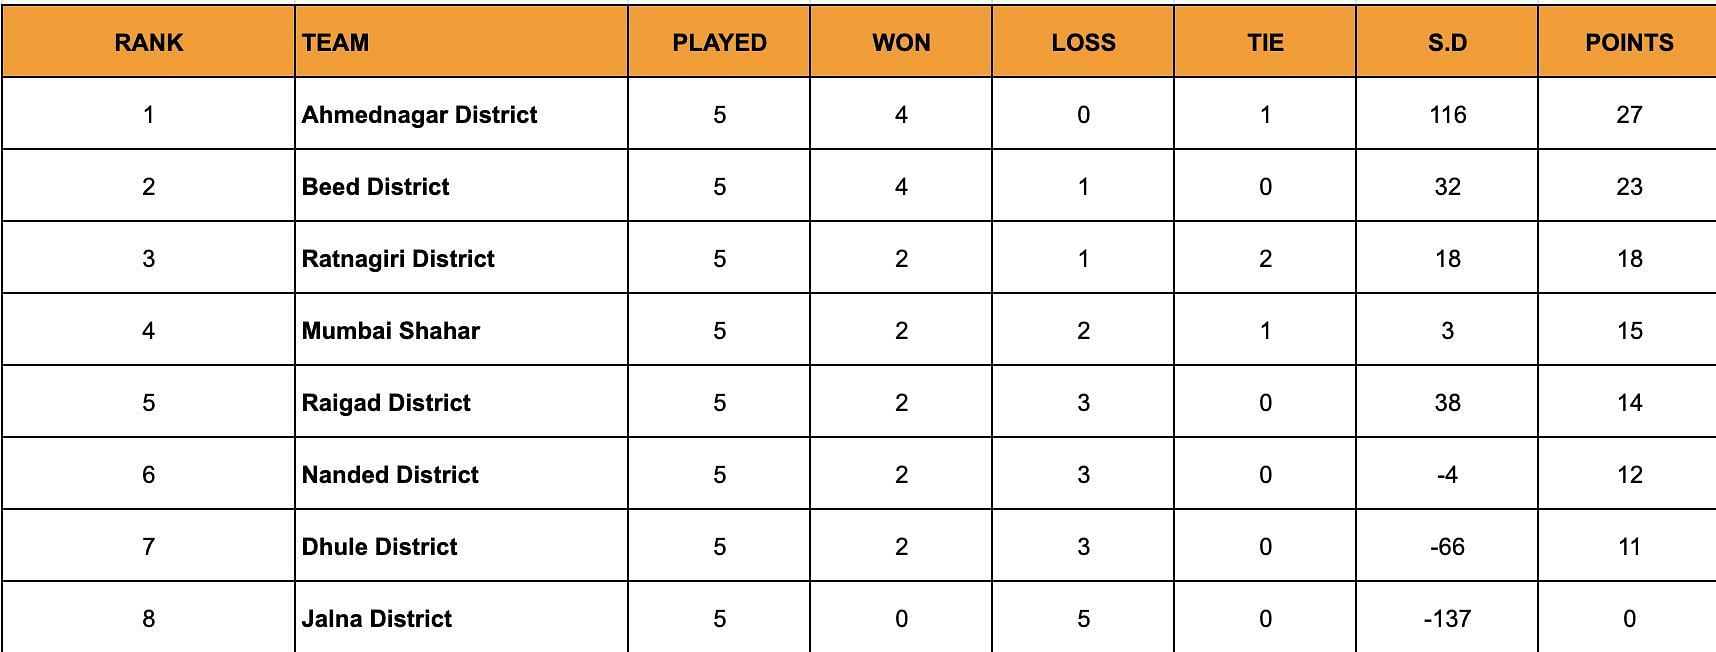 A look at the standings after Day 5.